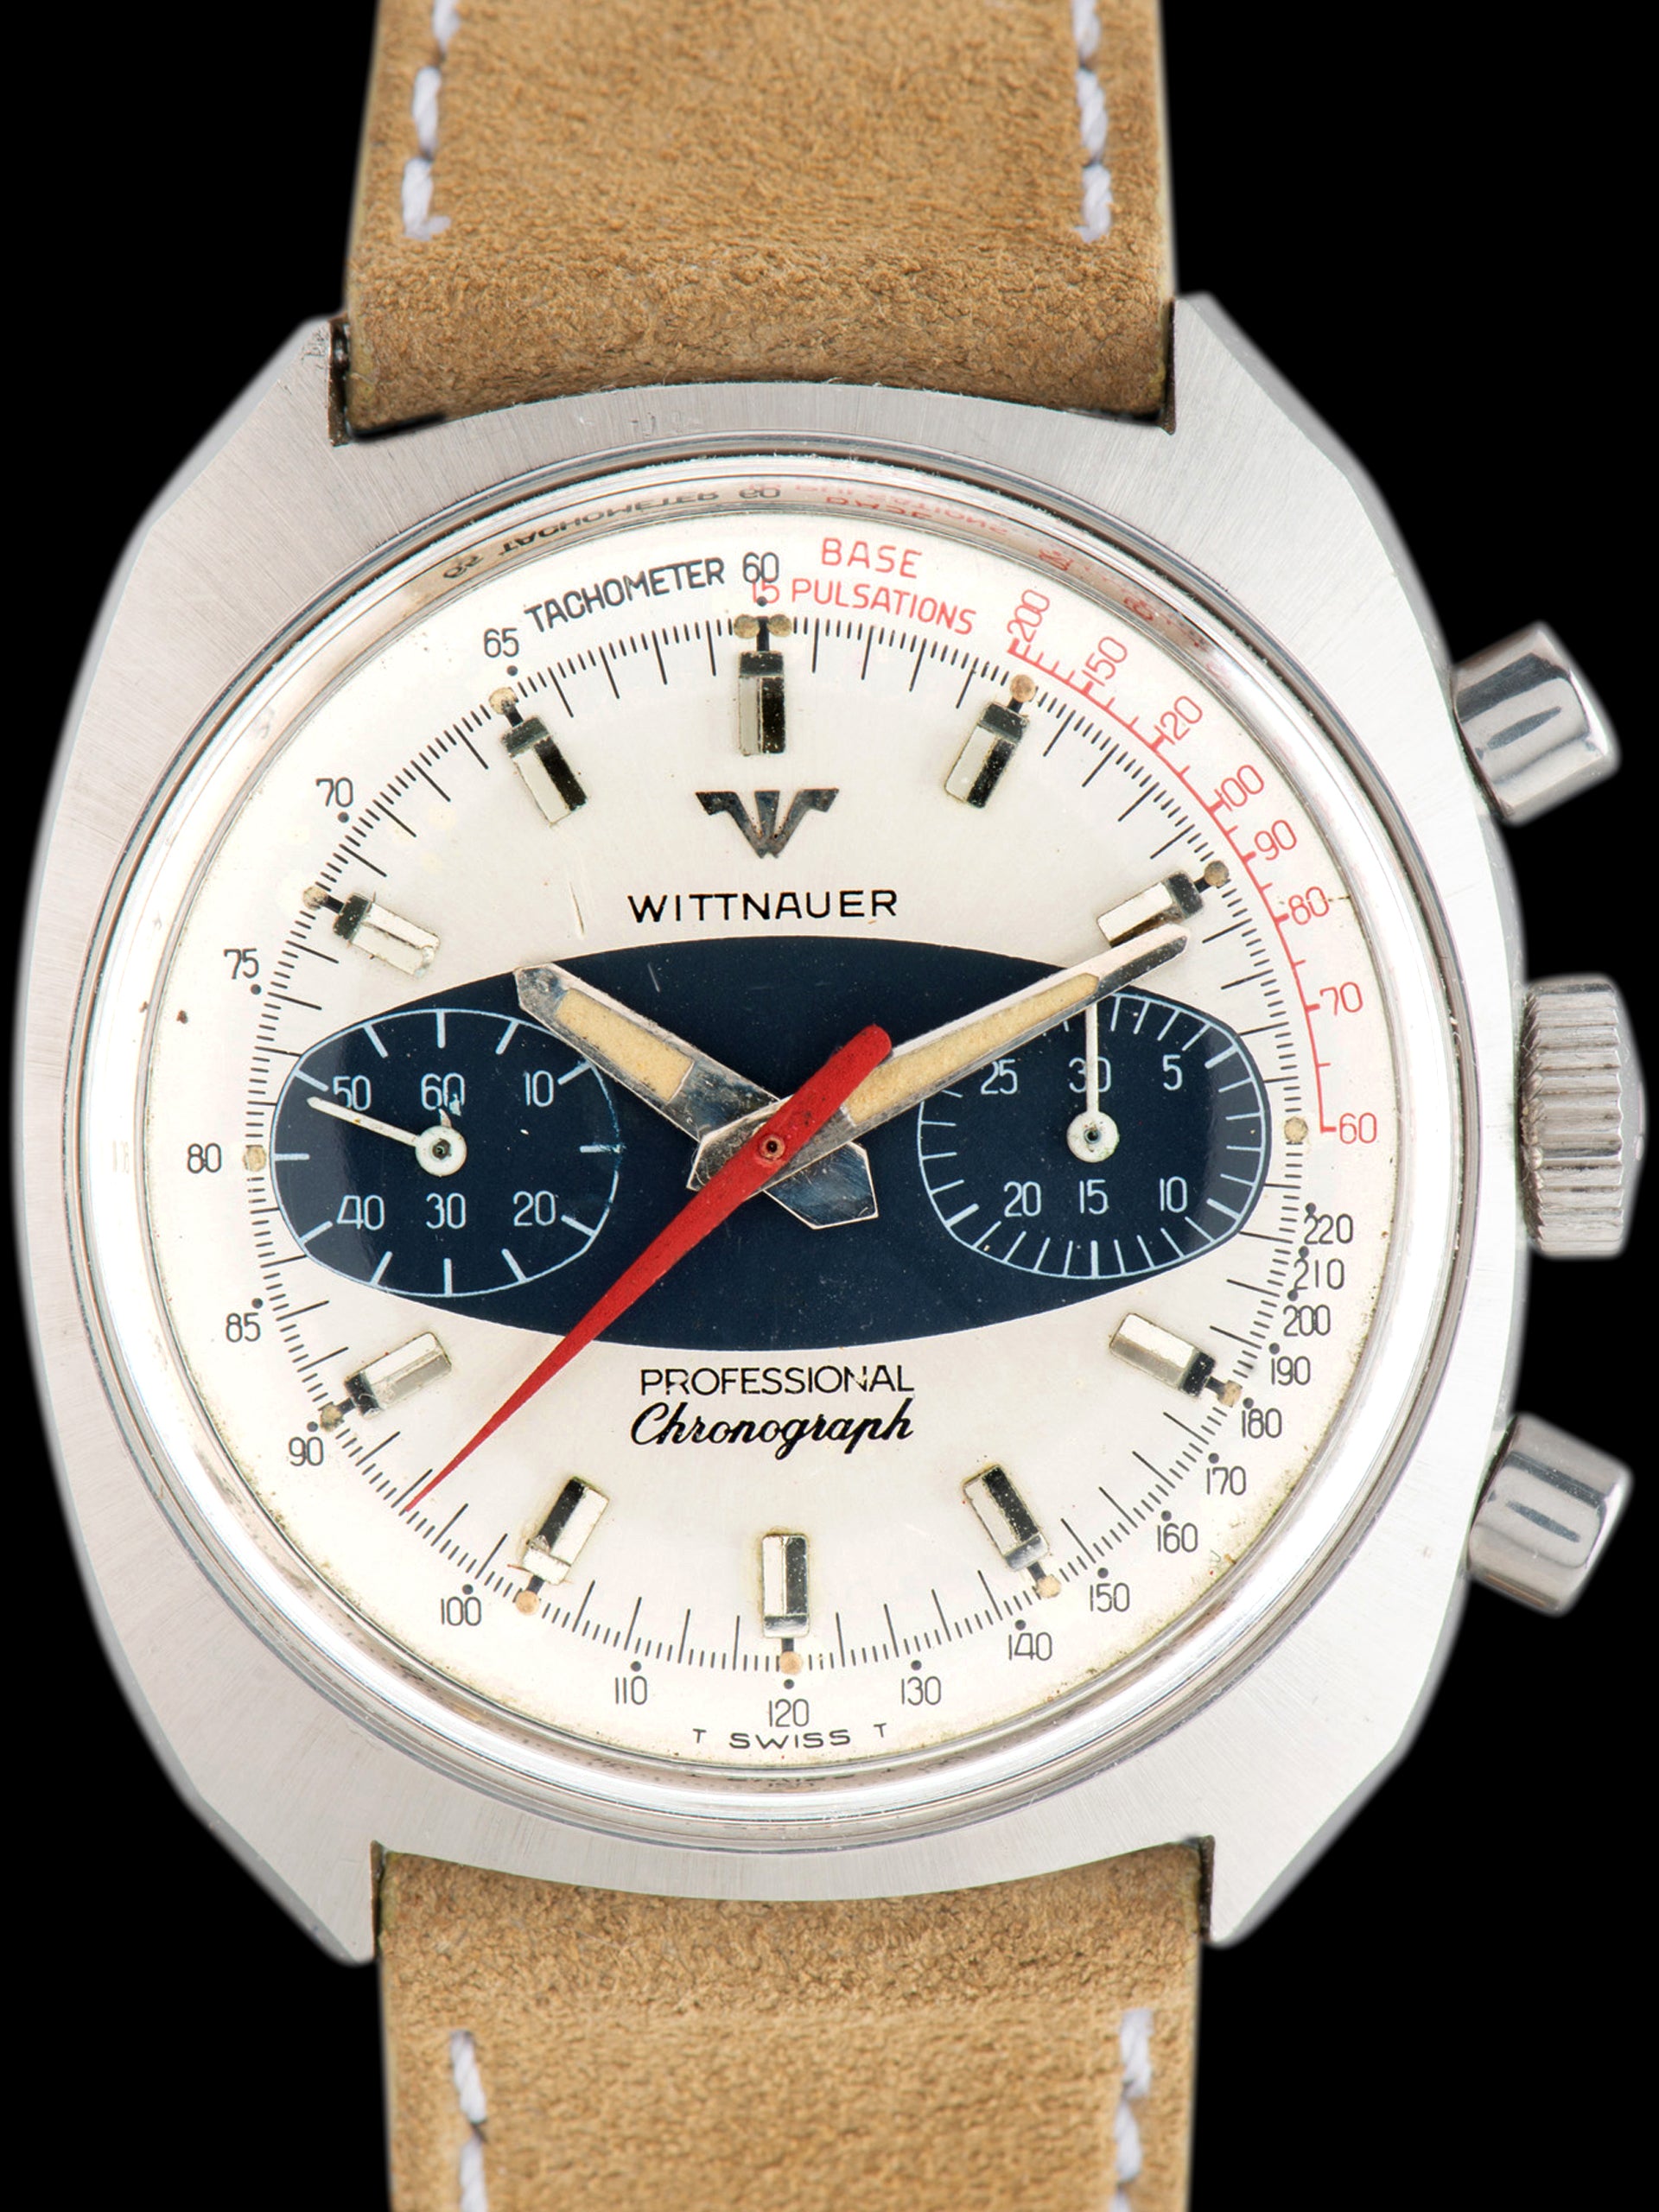 1960s Wittnauer Professional Chronograph (Ref. 247T) "Surfboard Dial"